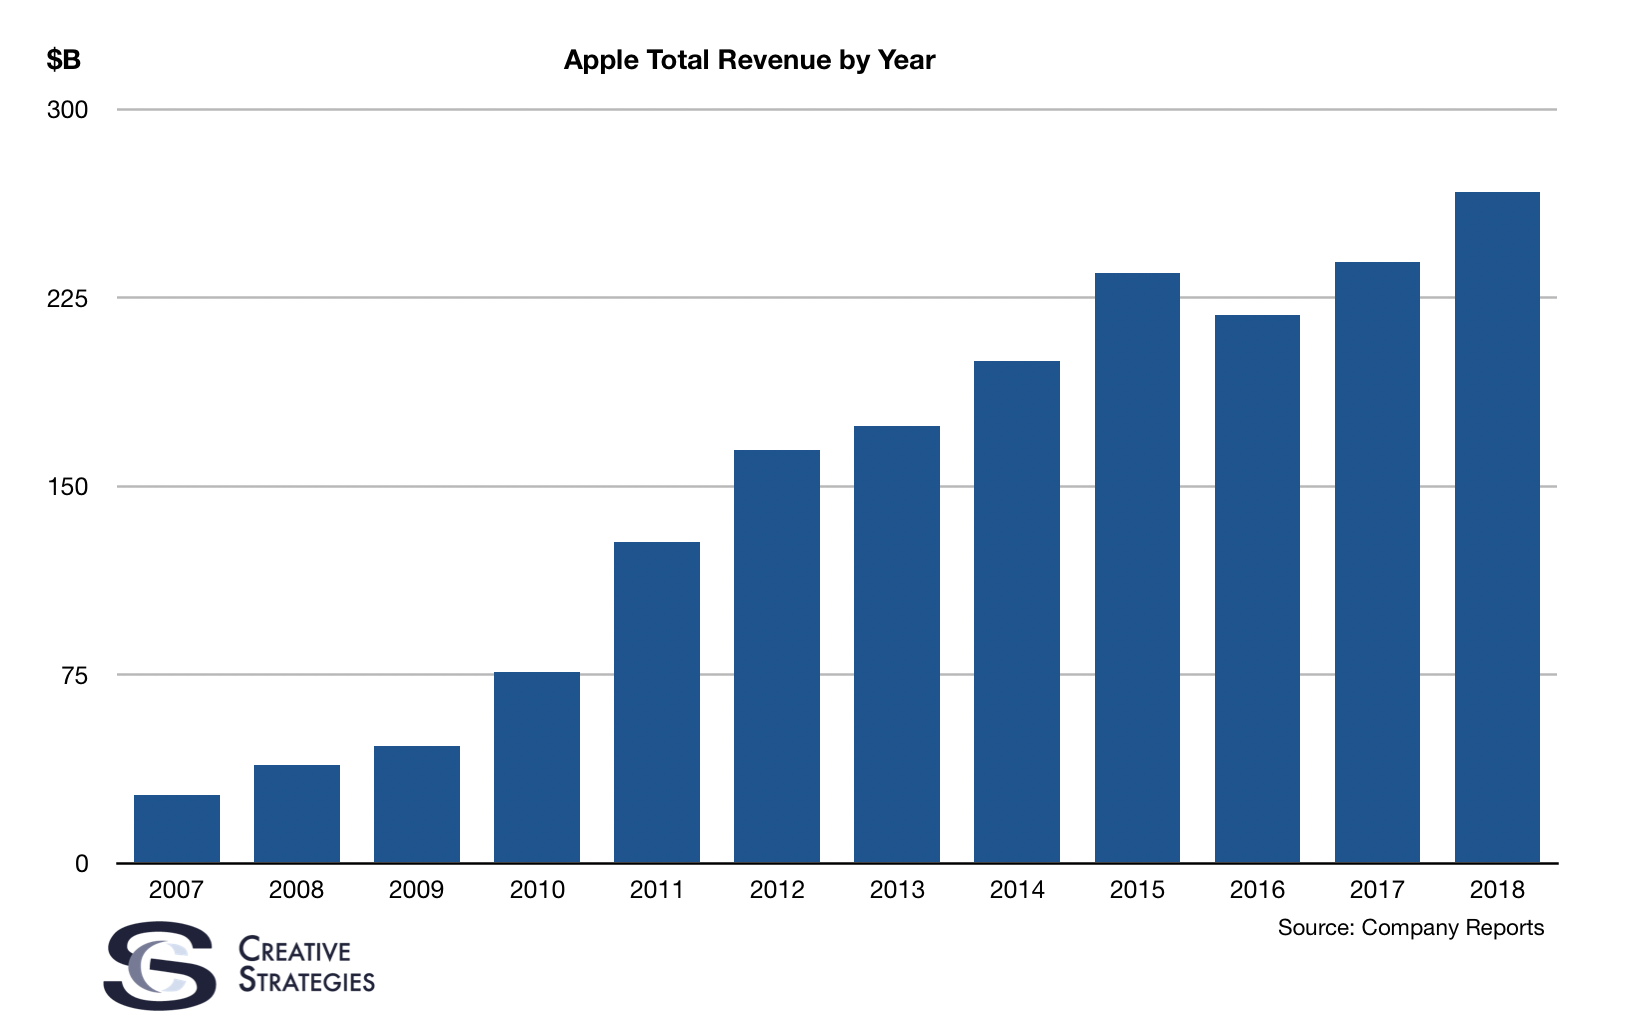 iPhone Unit Sales, and the Most Relevant Metric